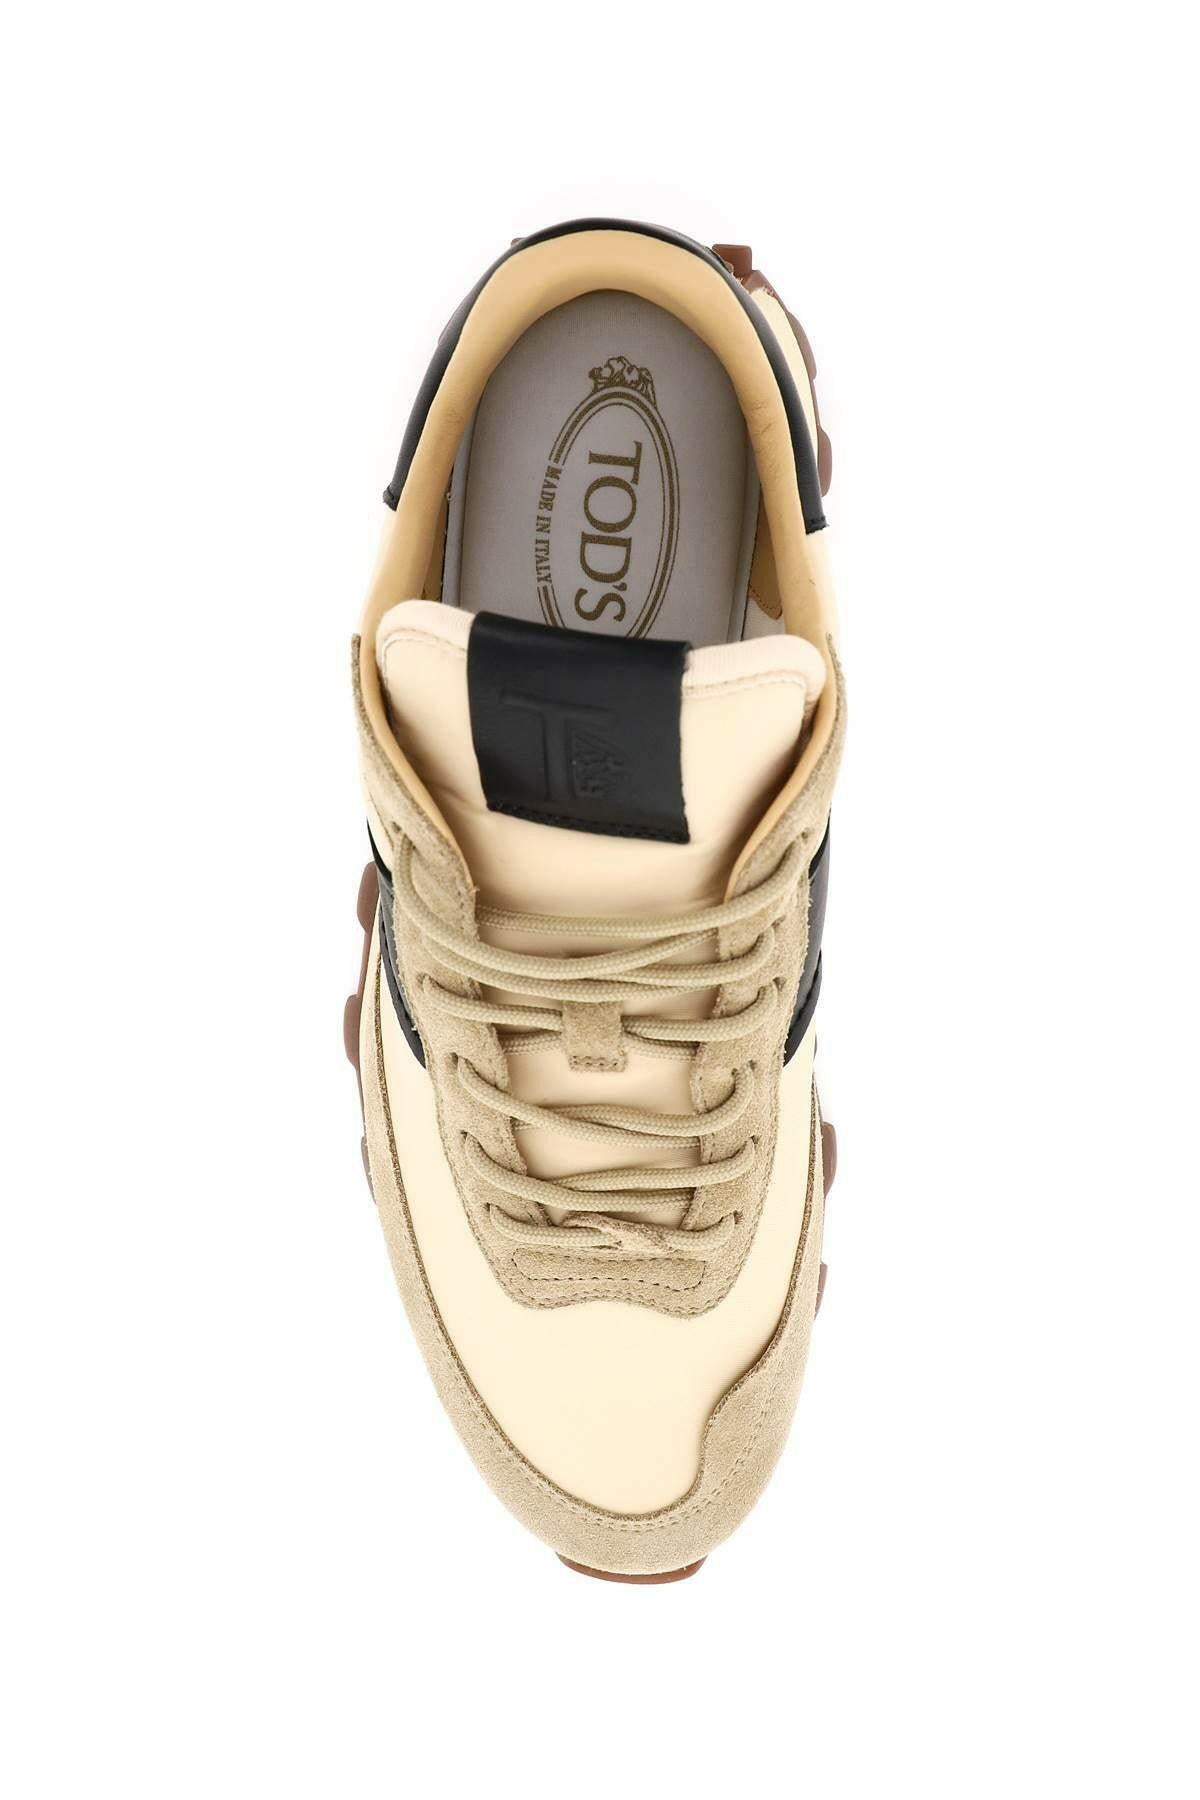 Suede Leather And Nylon 1t Sneakers TOD'S JOHN JULIA.